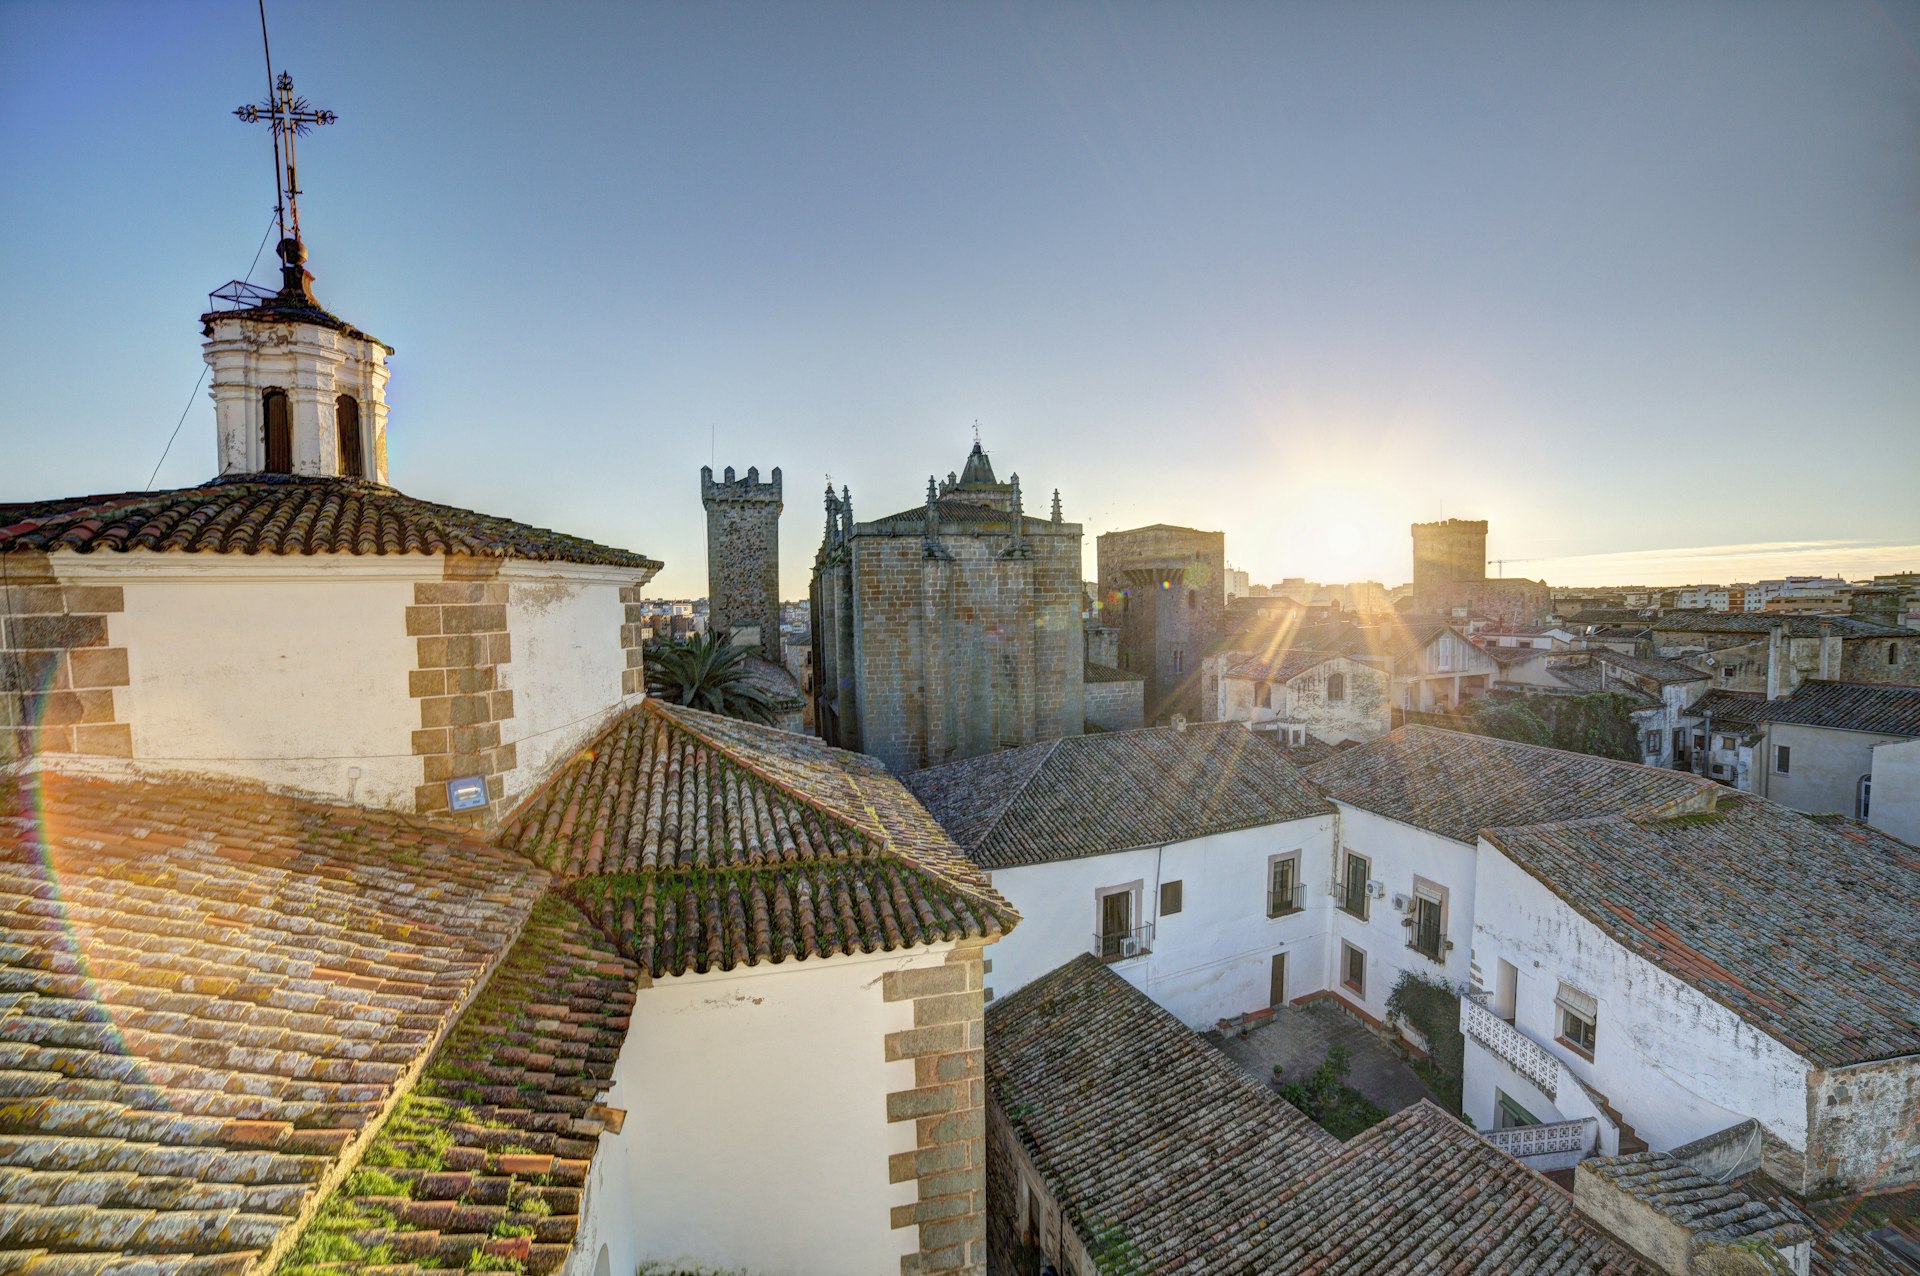 A view across the rooftops of picturesque Cáceres. © Luis Davilla / Getty Images